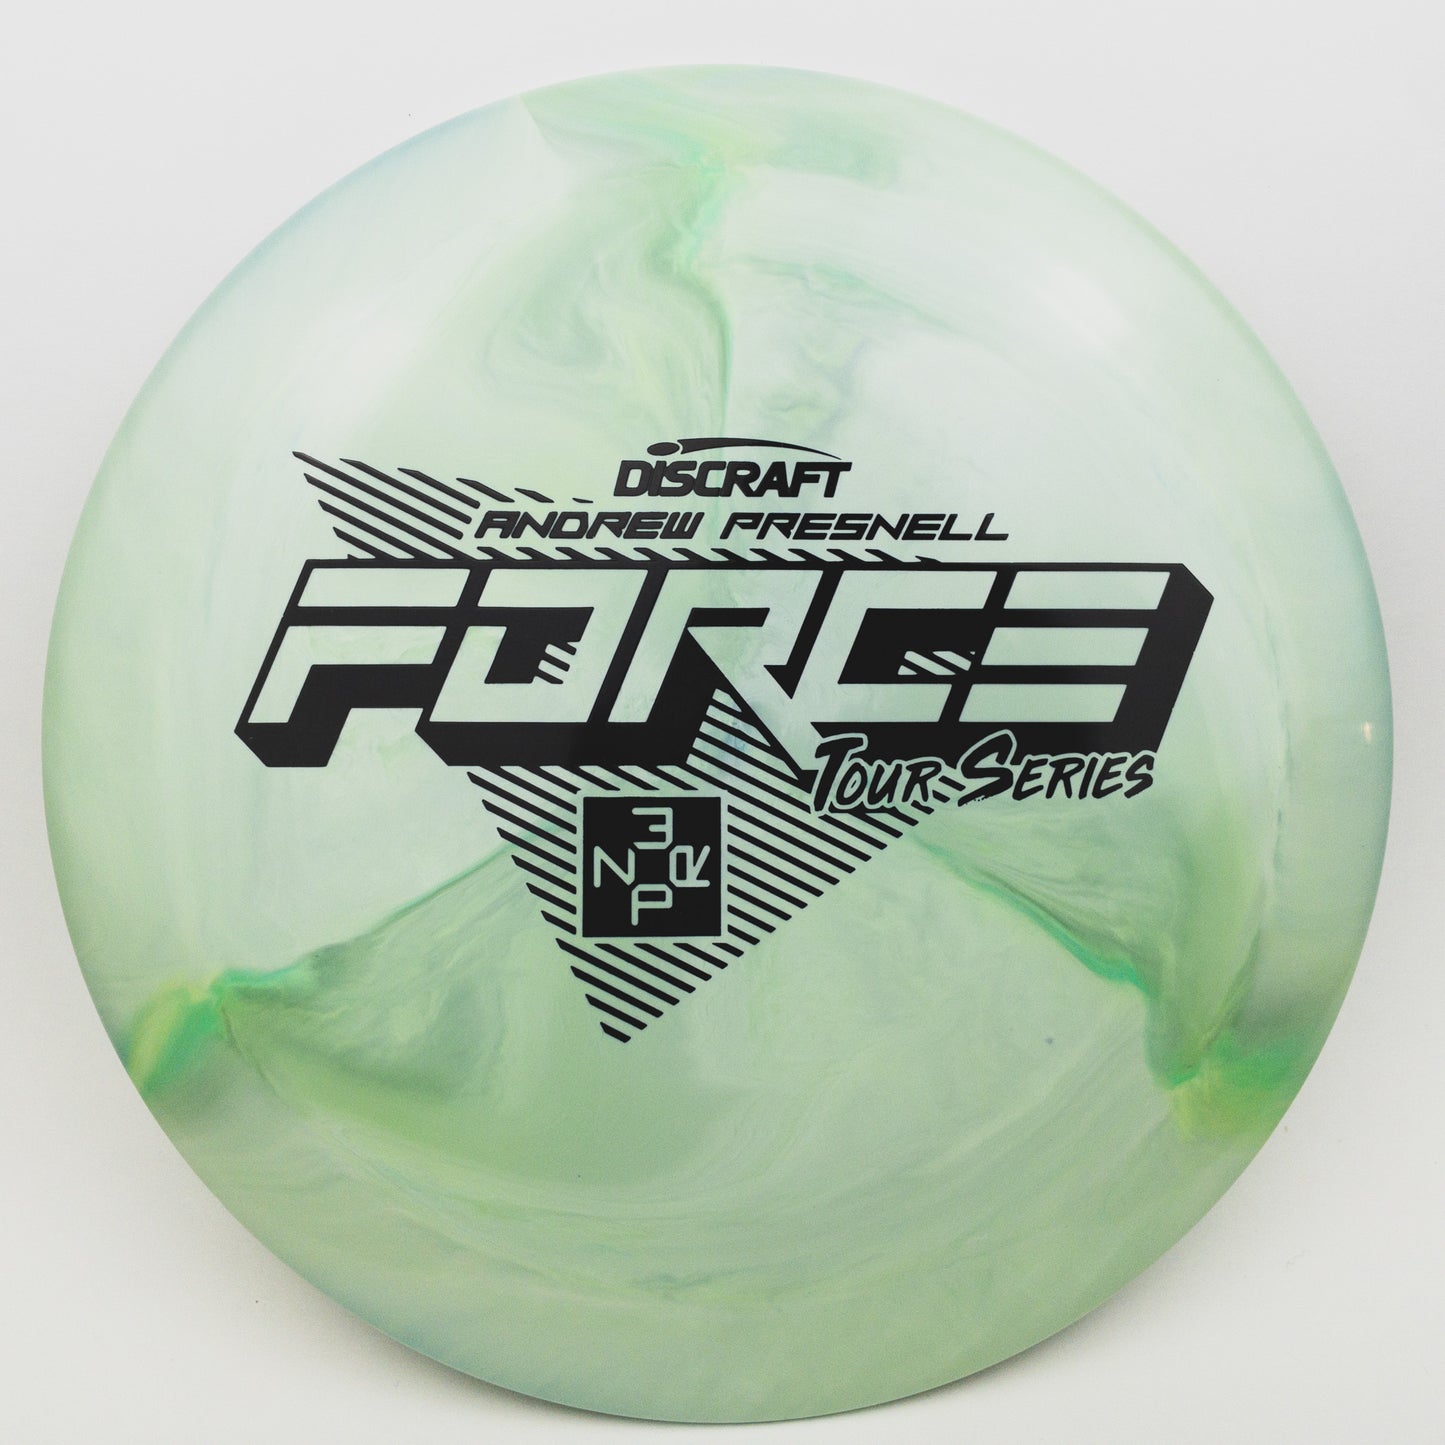 Discraft ESP Swirl Force Andrew Presnell Tour 2022